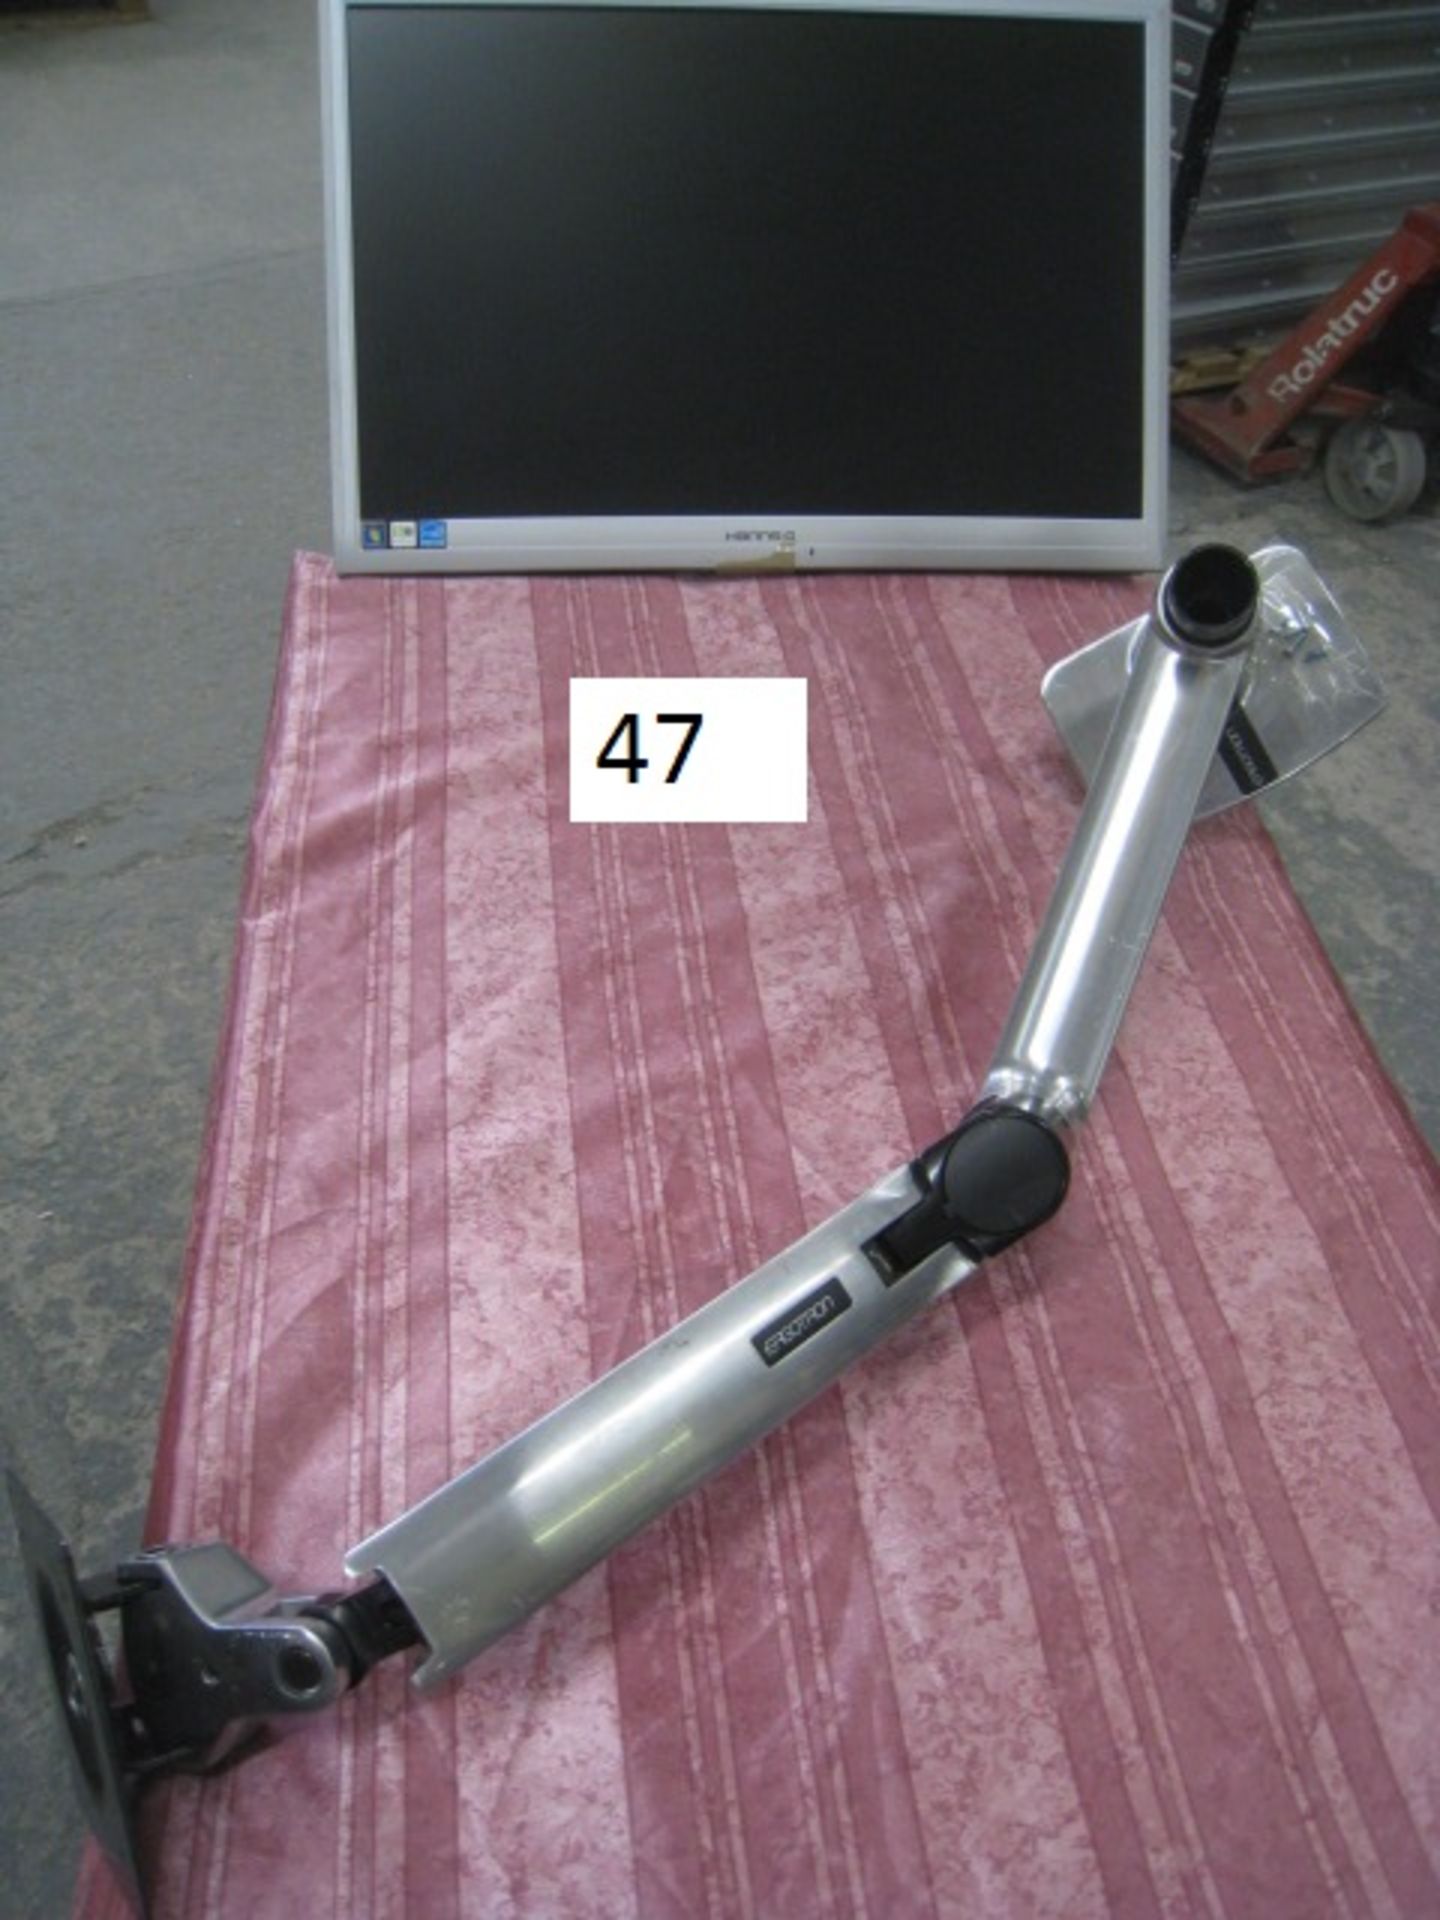 HannsG HP222DJO 22 inch LCD flat panel monitor VGA & DVI output with Ergtotron support bracket